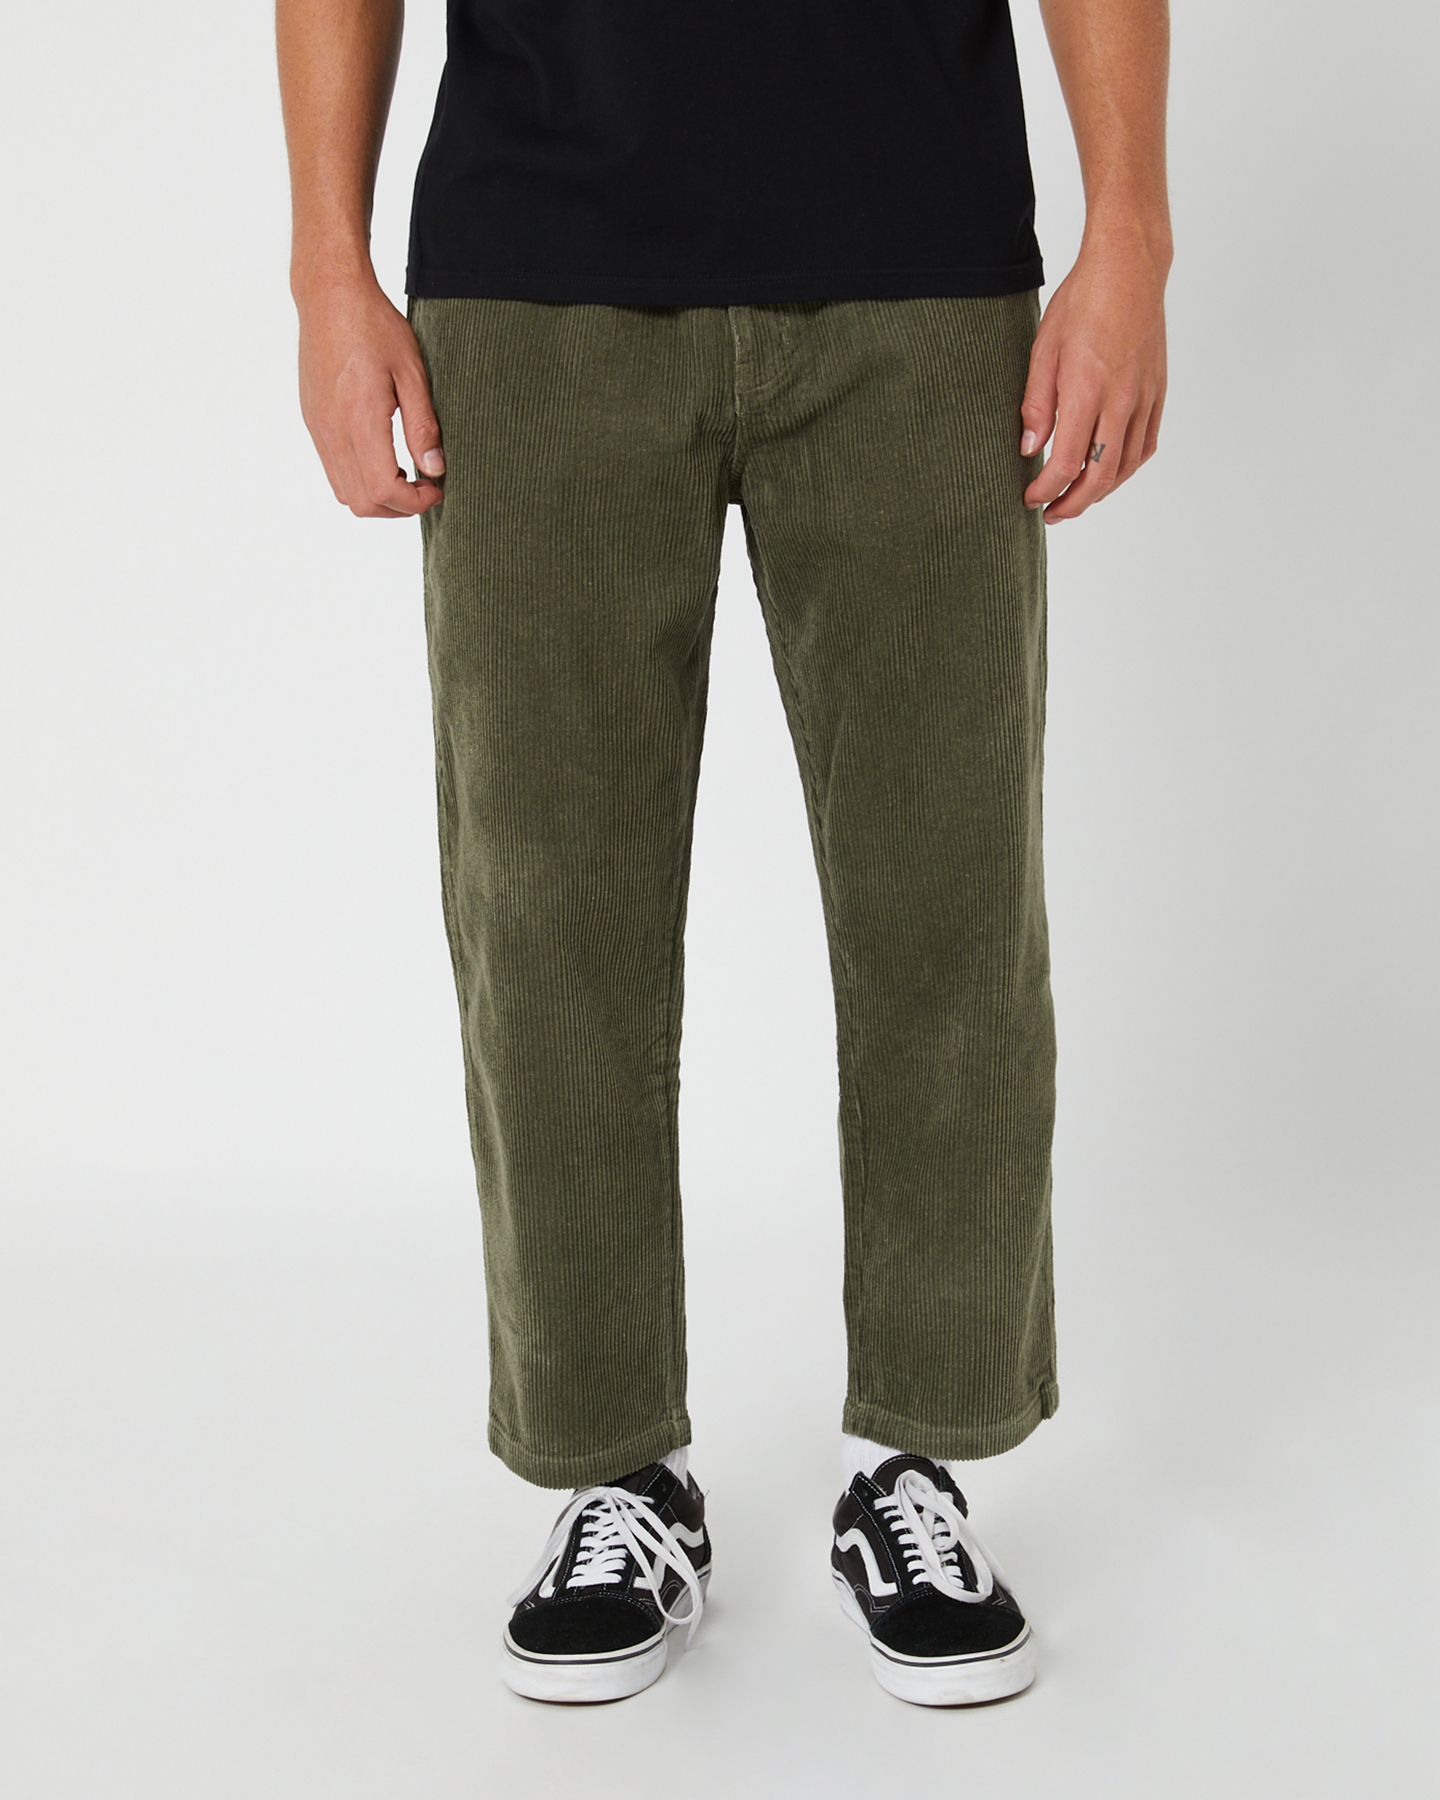 No News Rhodes Cord Pant - Military | SurfStitch